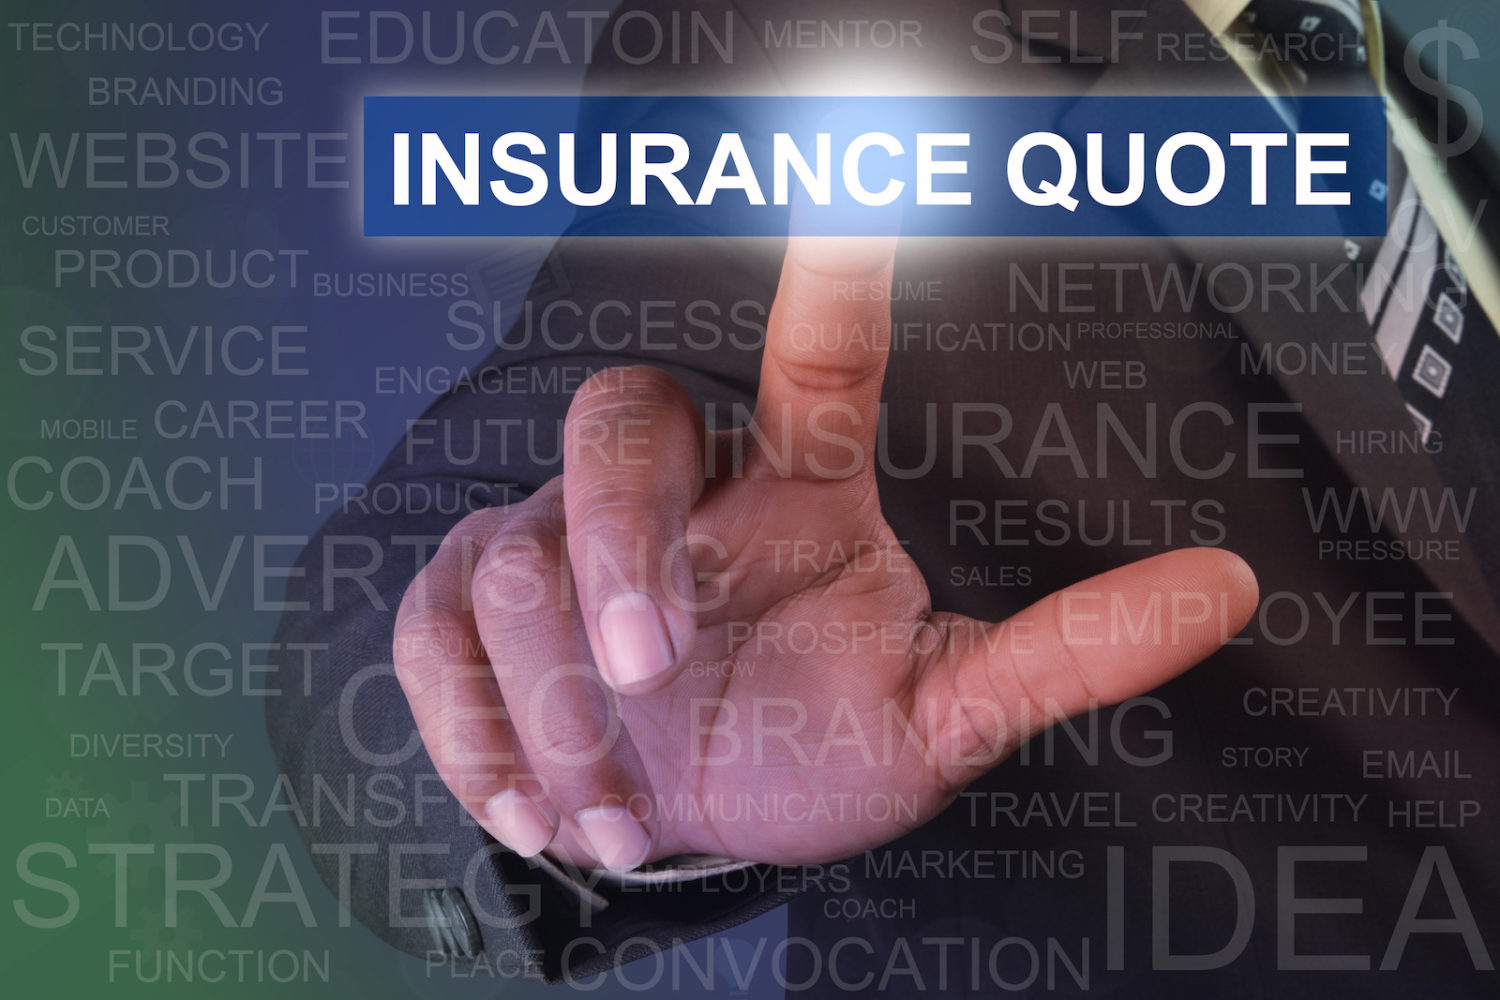 How To Get An Online Insurance Quote In Canada - ALIGNED Insurance Brokers